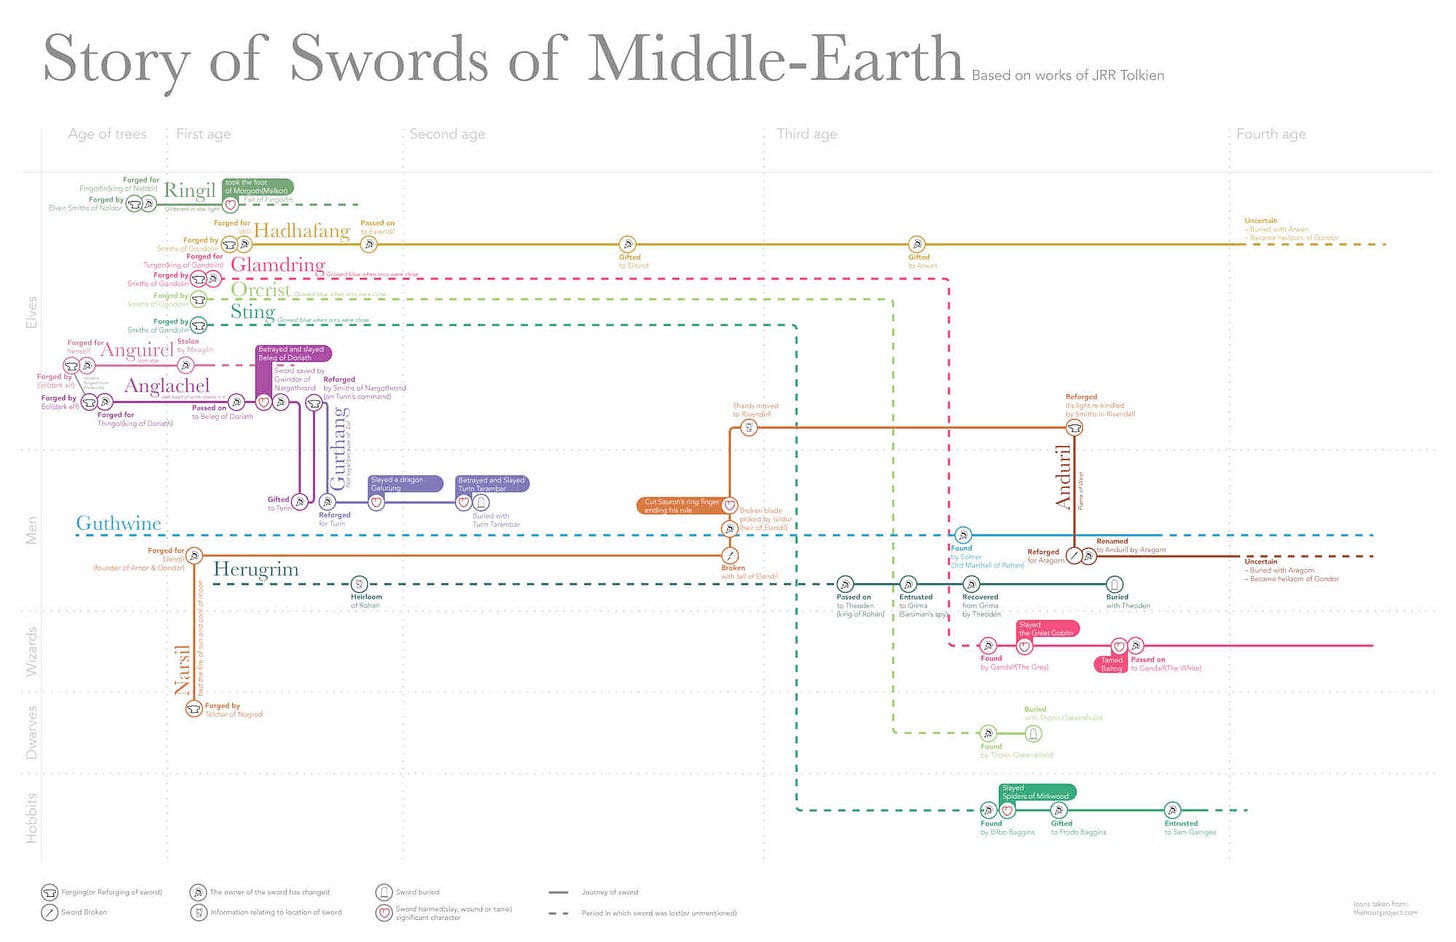 Story of the swords of Middle-Earth